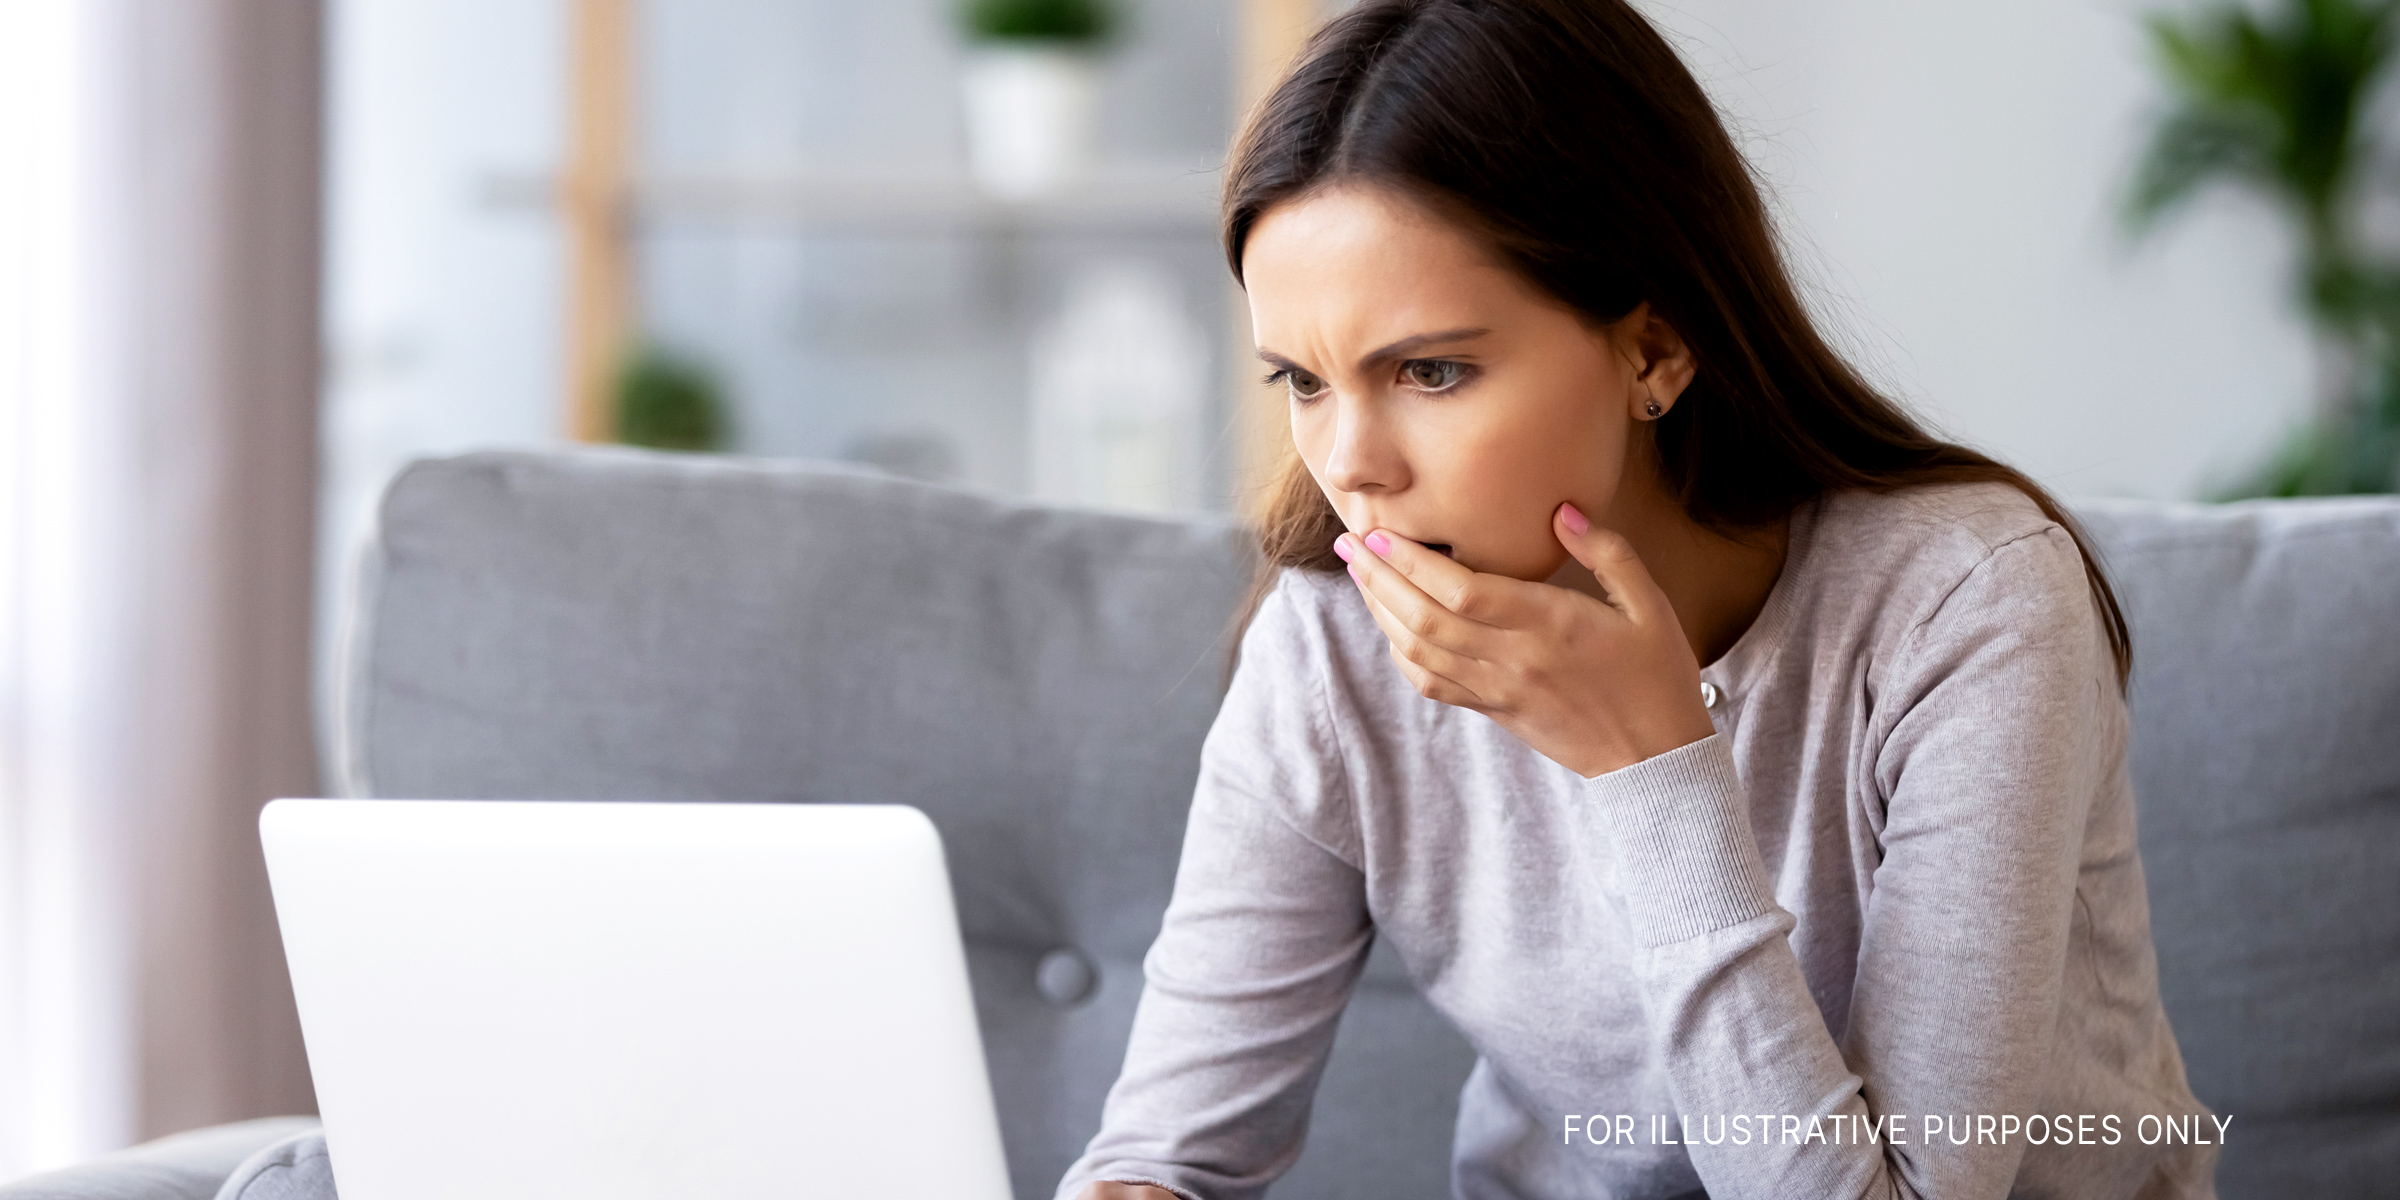 A shocked young woman looking at her laptop screen | Source: Shutterstock